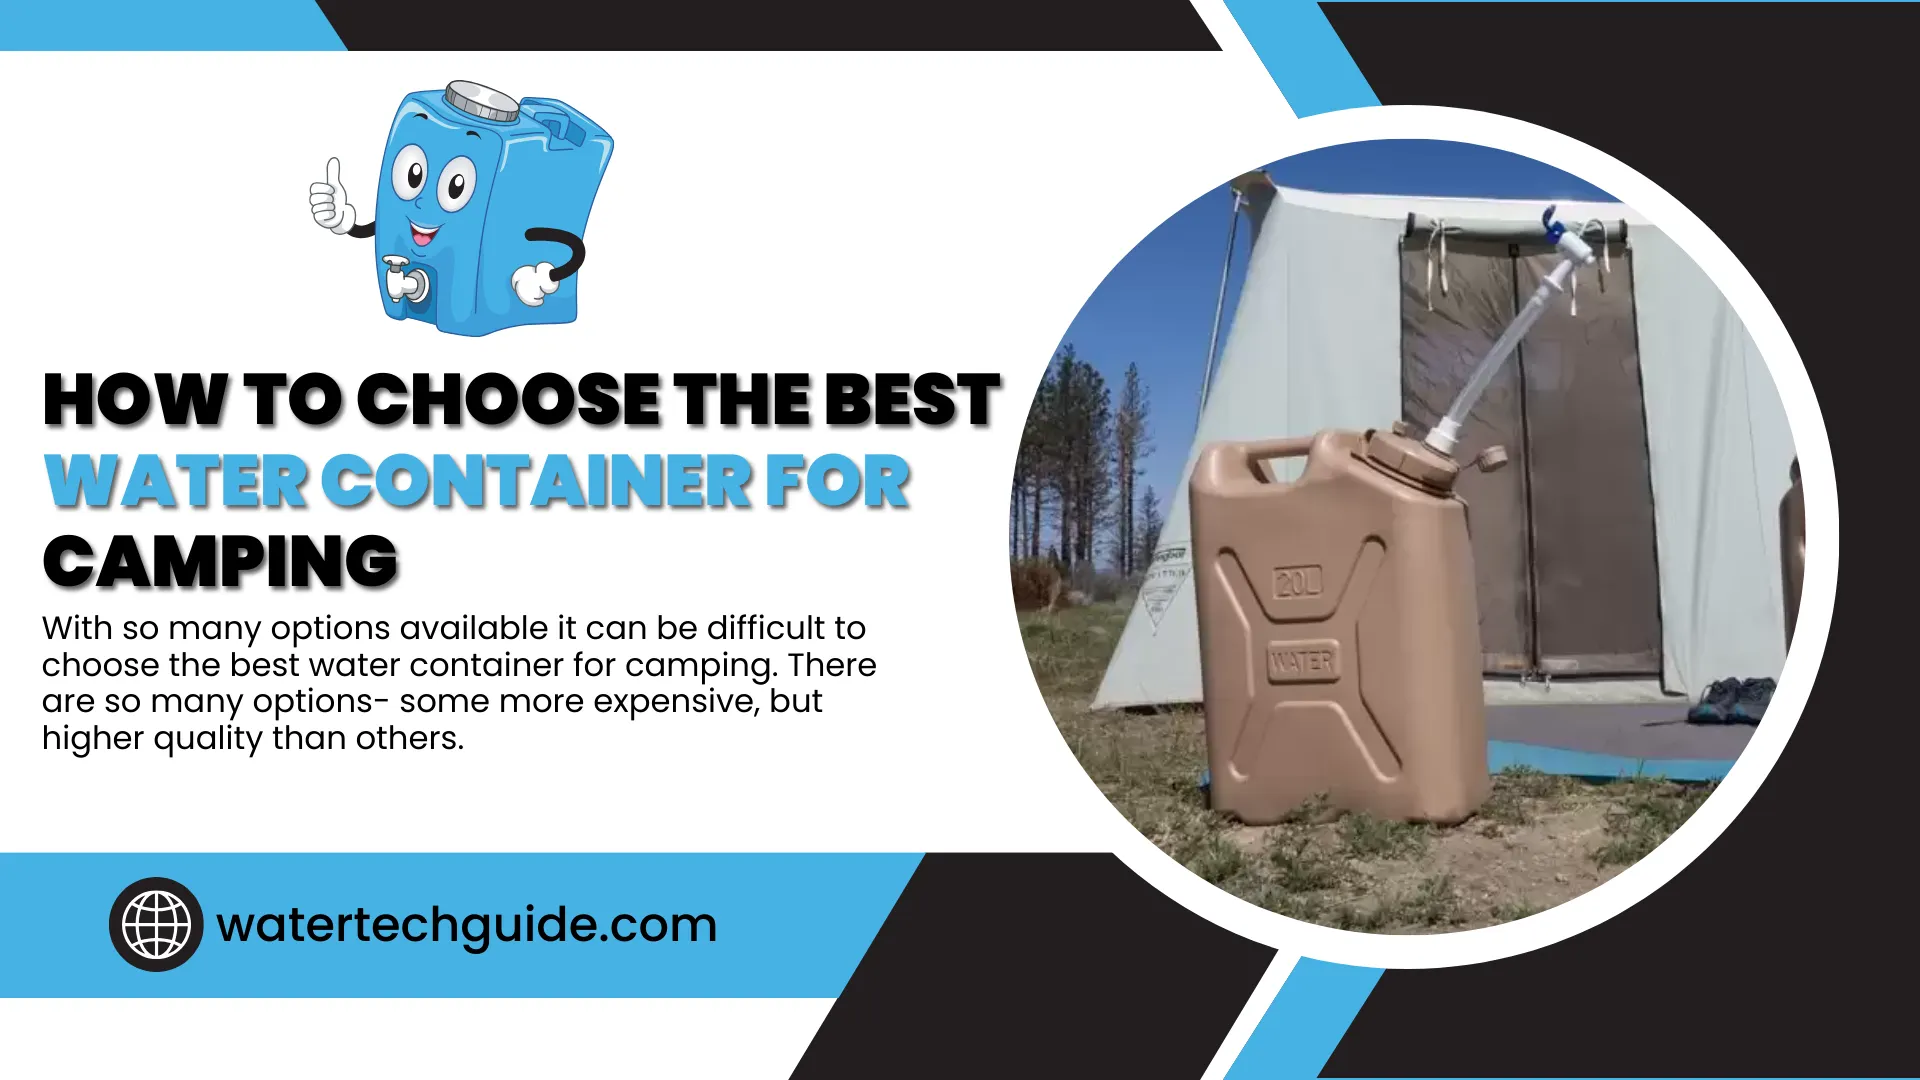 How to Choose the Best Water Container for Camping